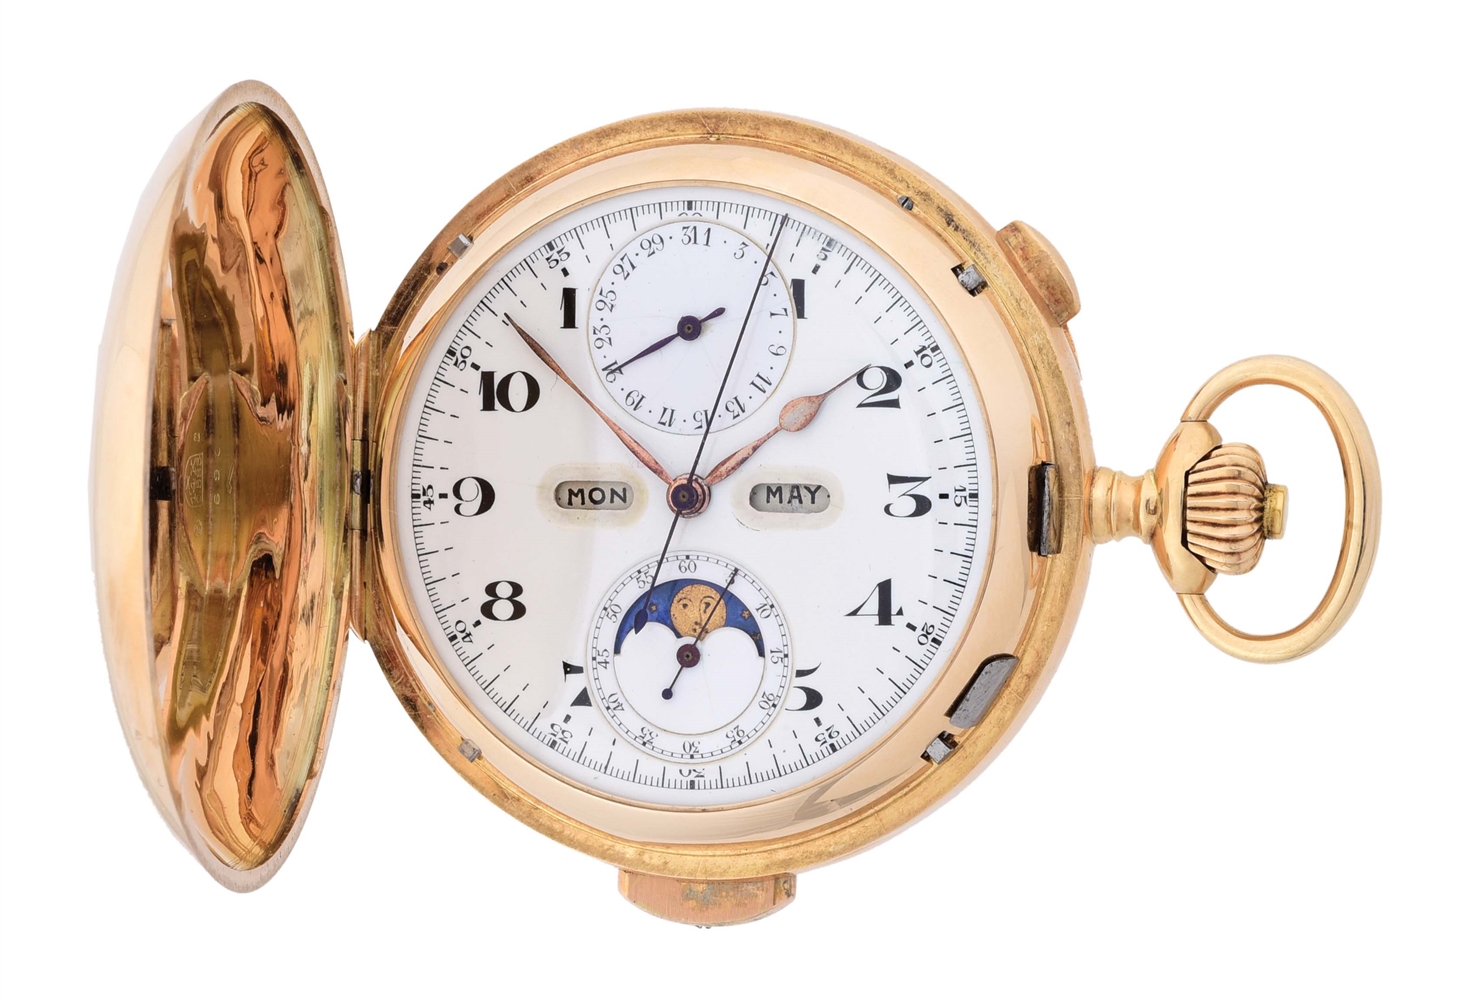 14K GOLD SWISS GRAND COMPLICATIONS MINUTE REPEATING CHRONOGRAPH H/C POCKET WATCH W/MOON PHASE CALENDAR.